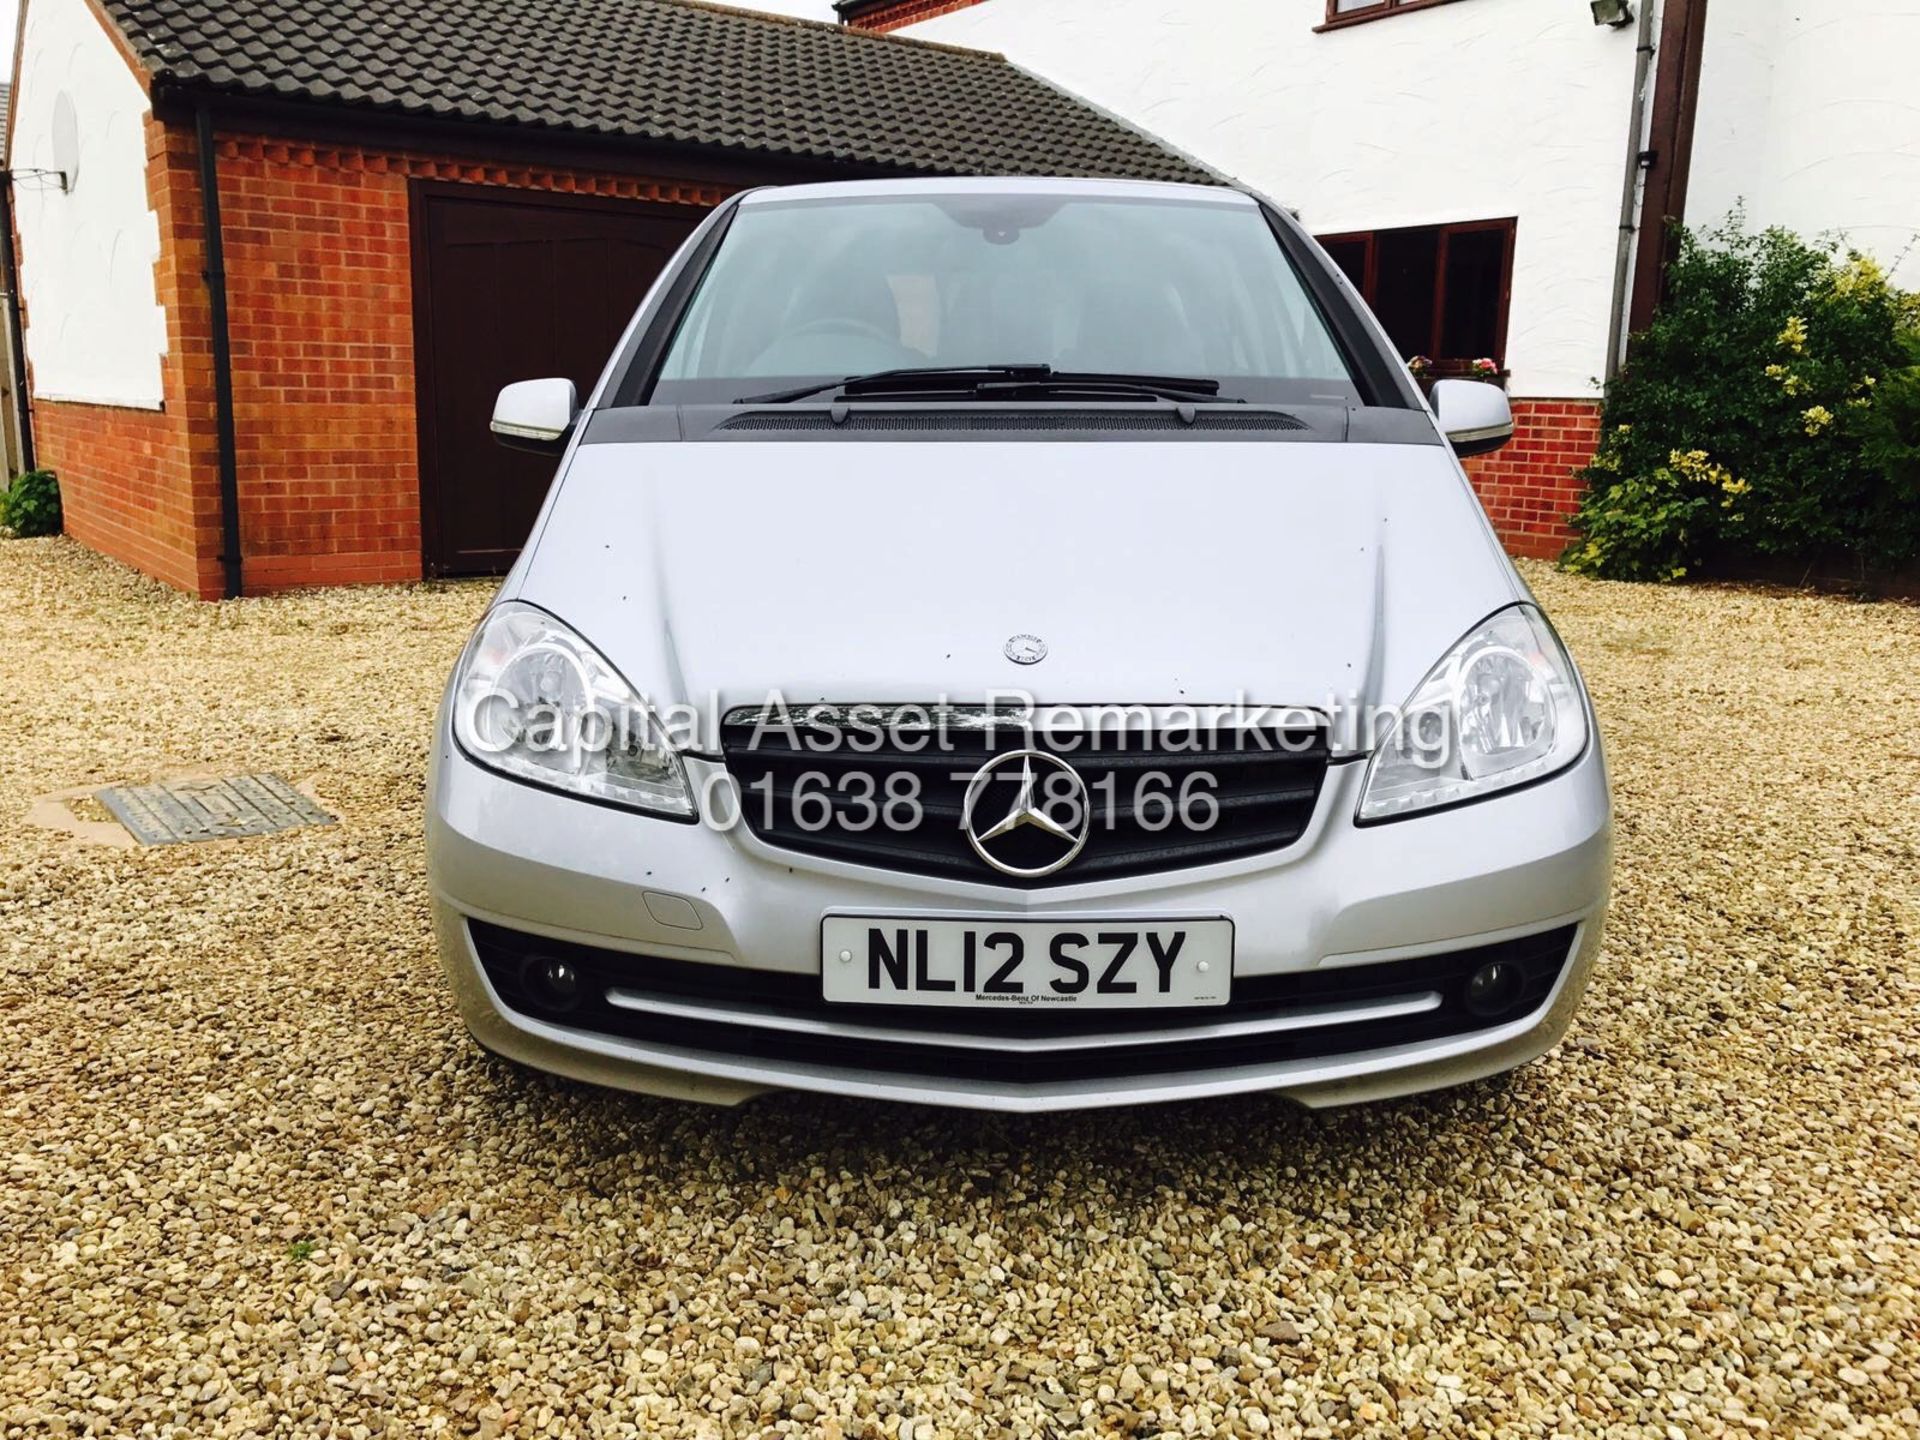 (ON SALE) MERCEDES A160 "SE CVT AUTO - 12 REG - ELEC PACK - SILVER - GENUINE MILES -AIR CON -1 OWNER - Image 2 of 15